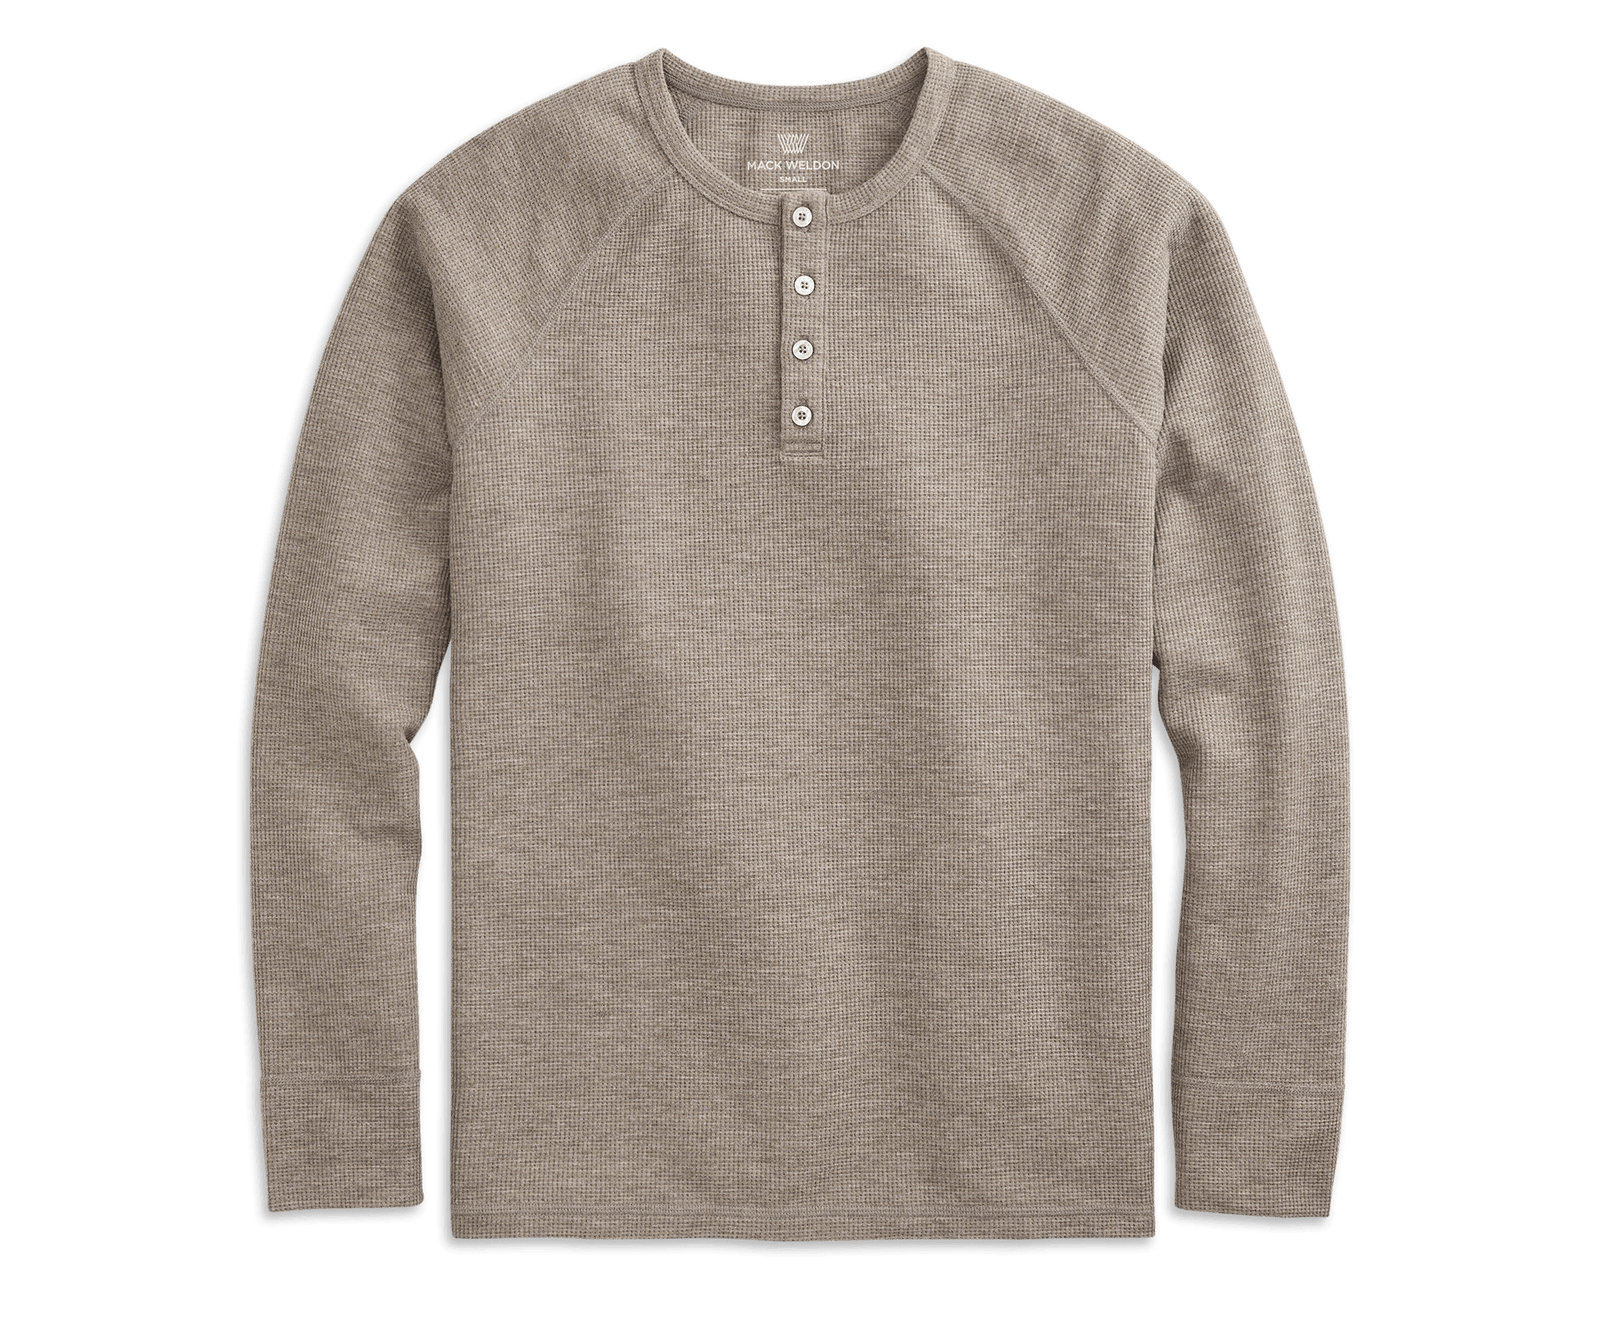 see-now-buy-now-this-mack-weldon-warmknit-henley-is-the-winter